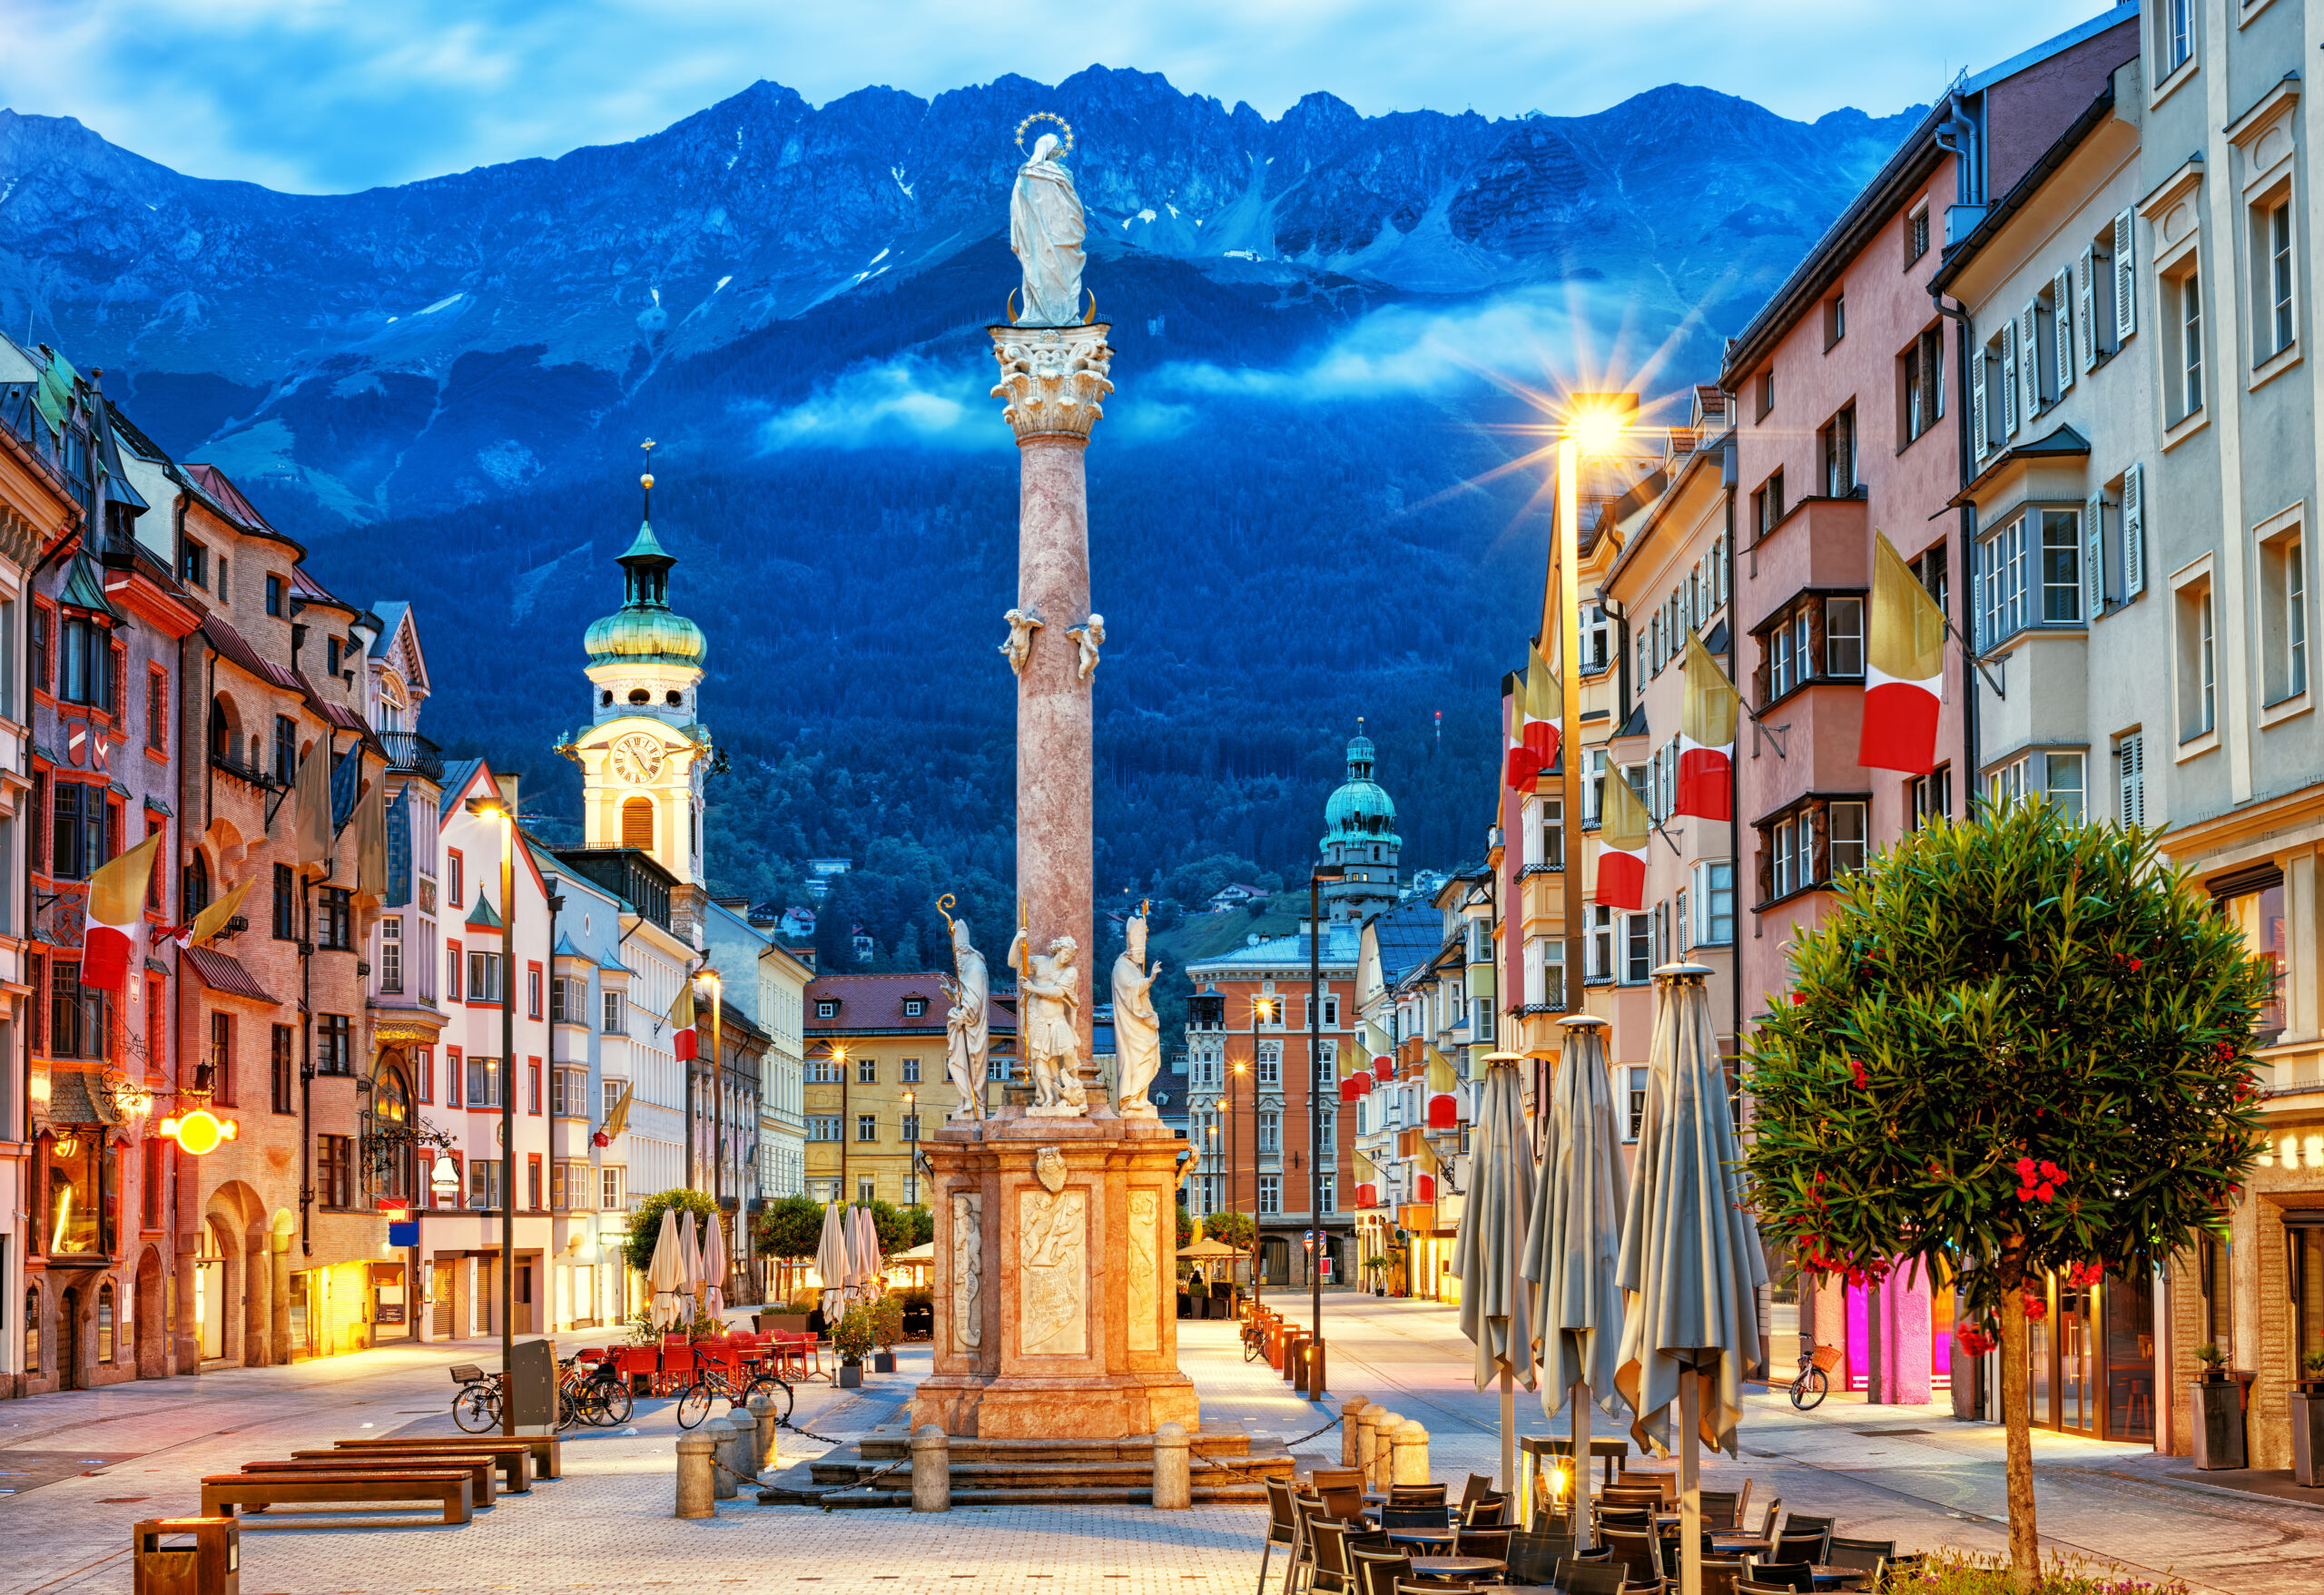 Old town in the alps with colourful houses on a square and a statue with saints.